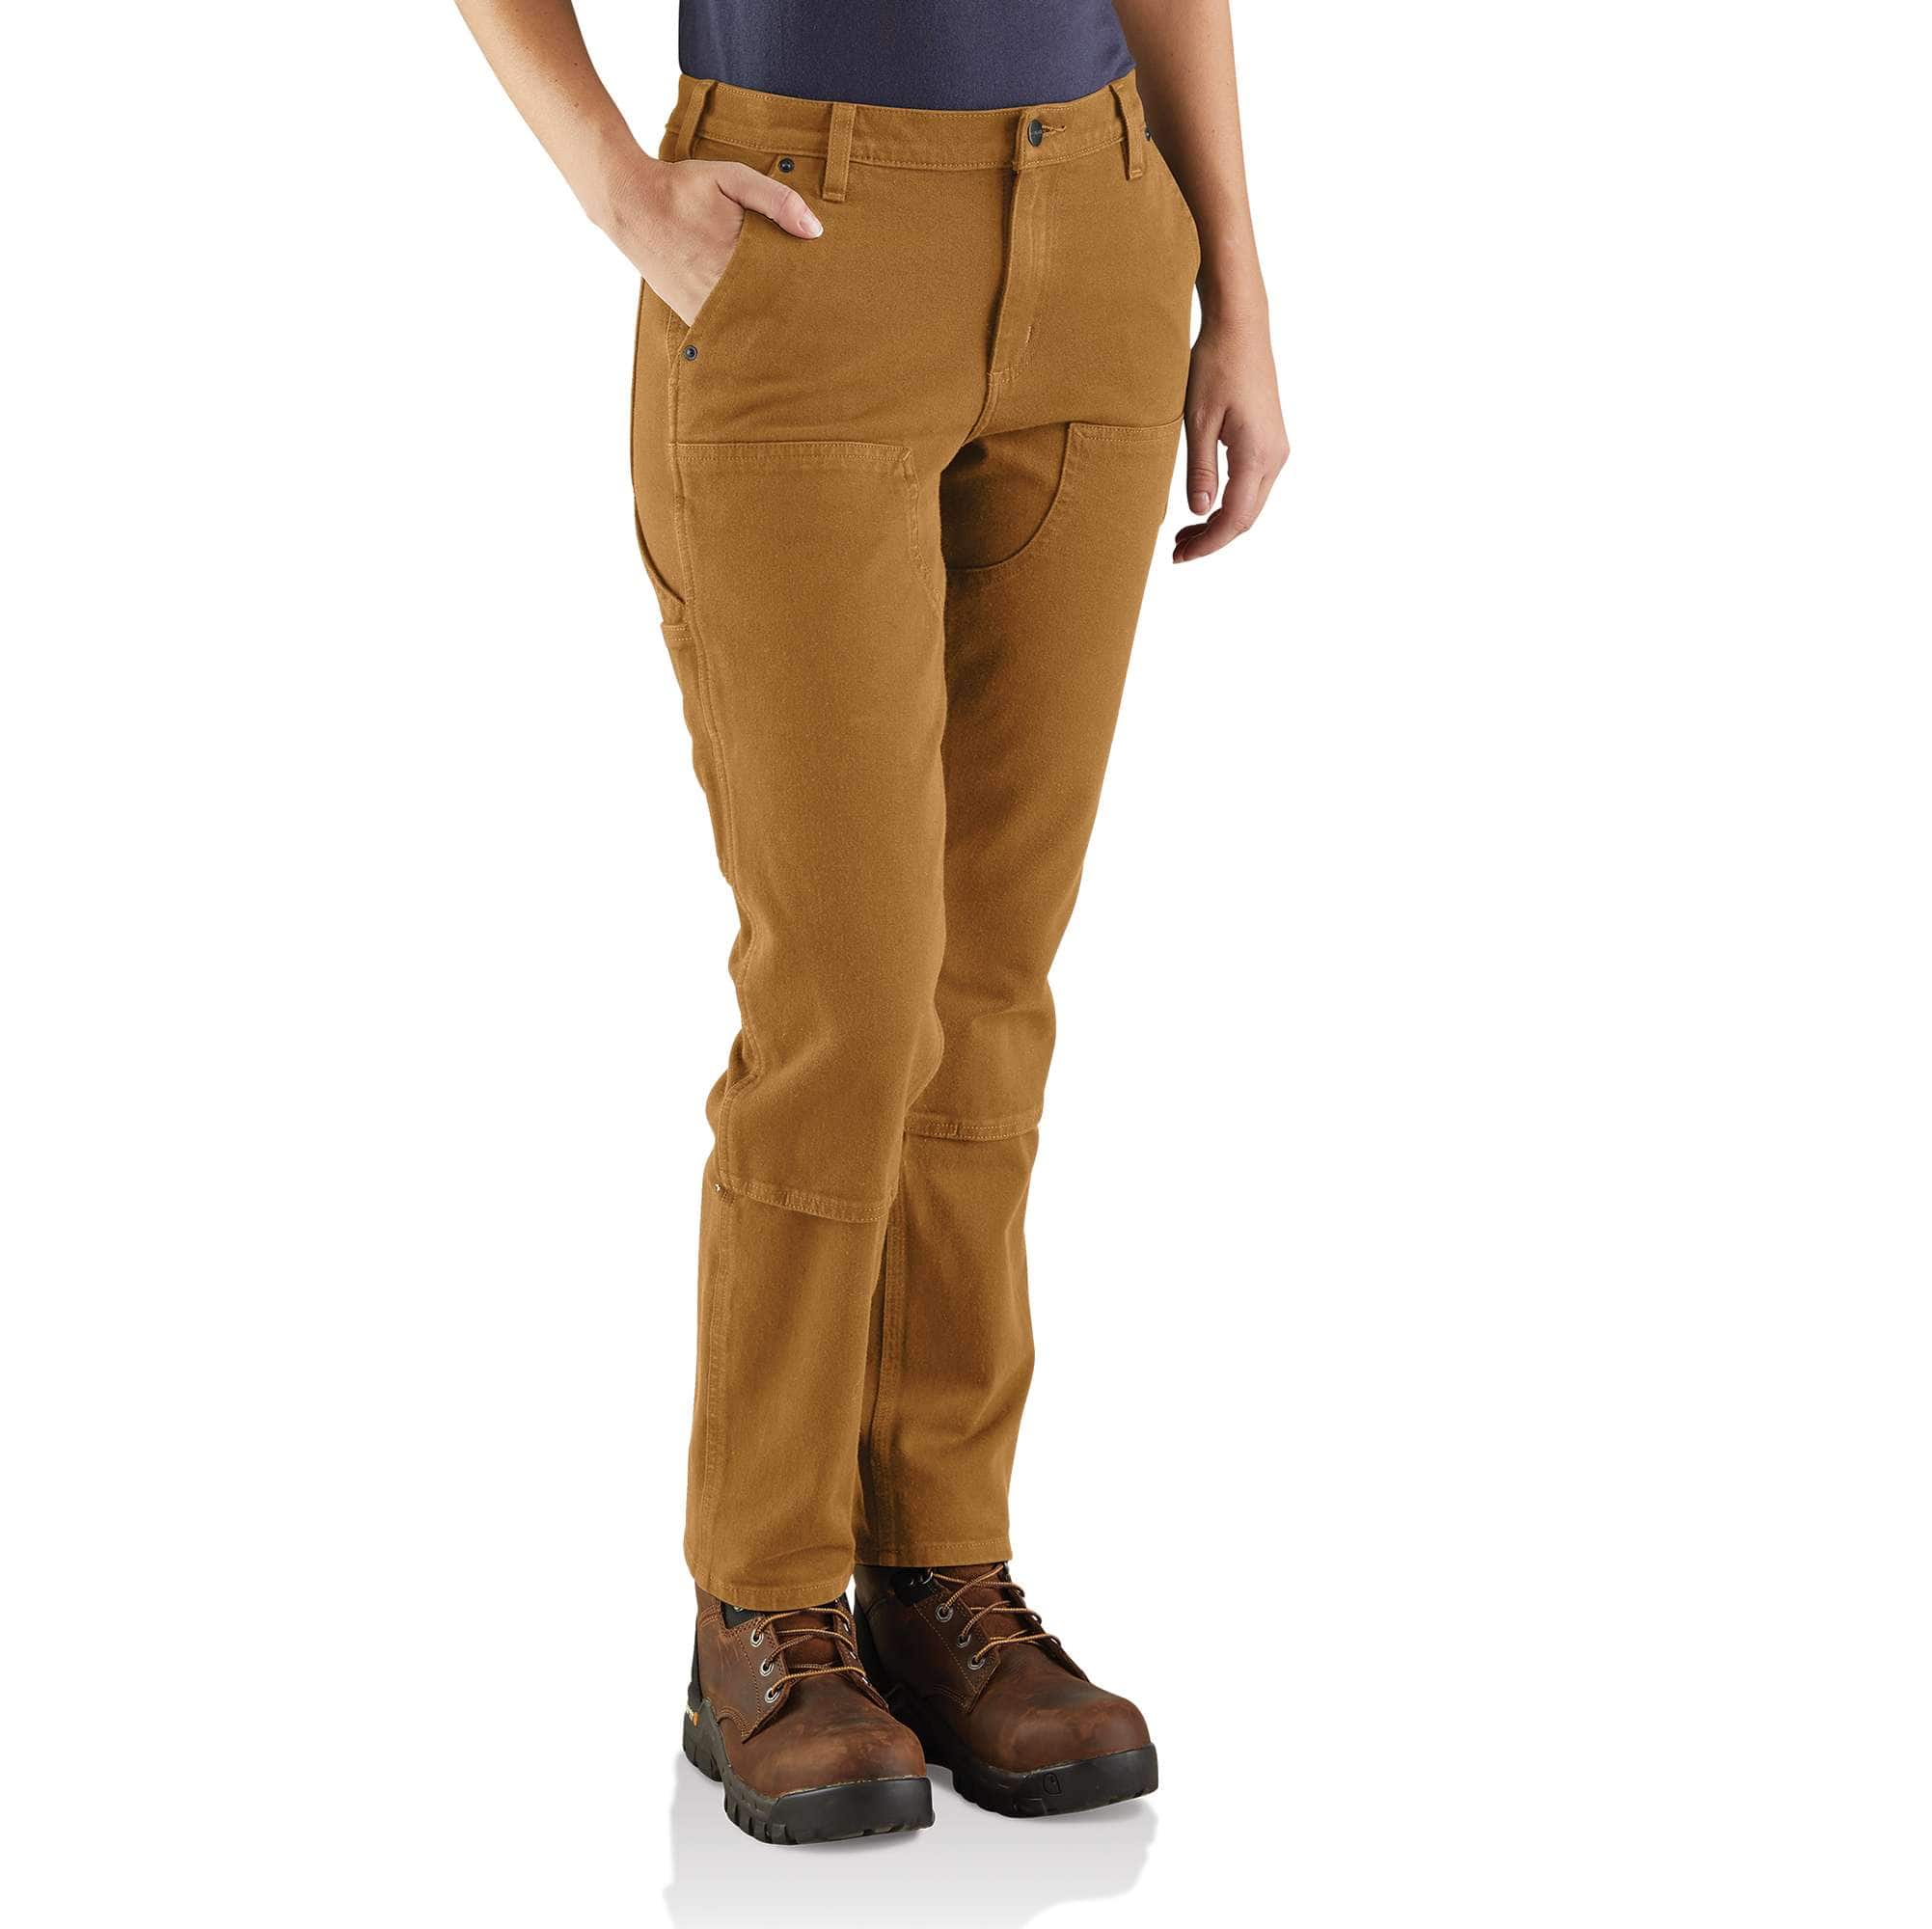 NWT CARHARTT Women's Brown Relaxed Fit Sandstone Kane Dungaree Pants ~ 18 